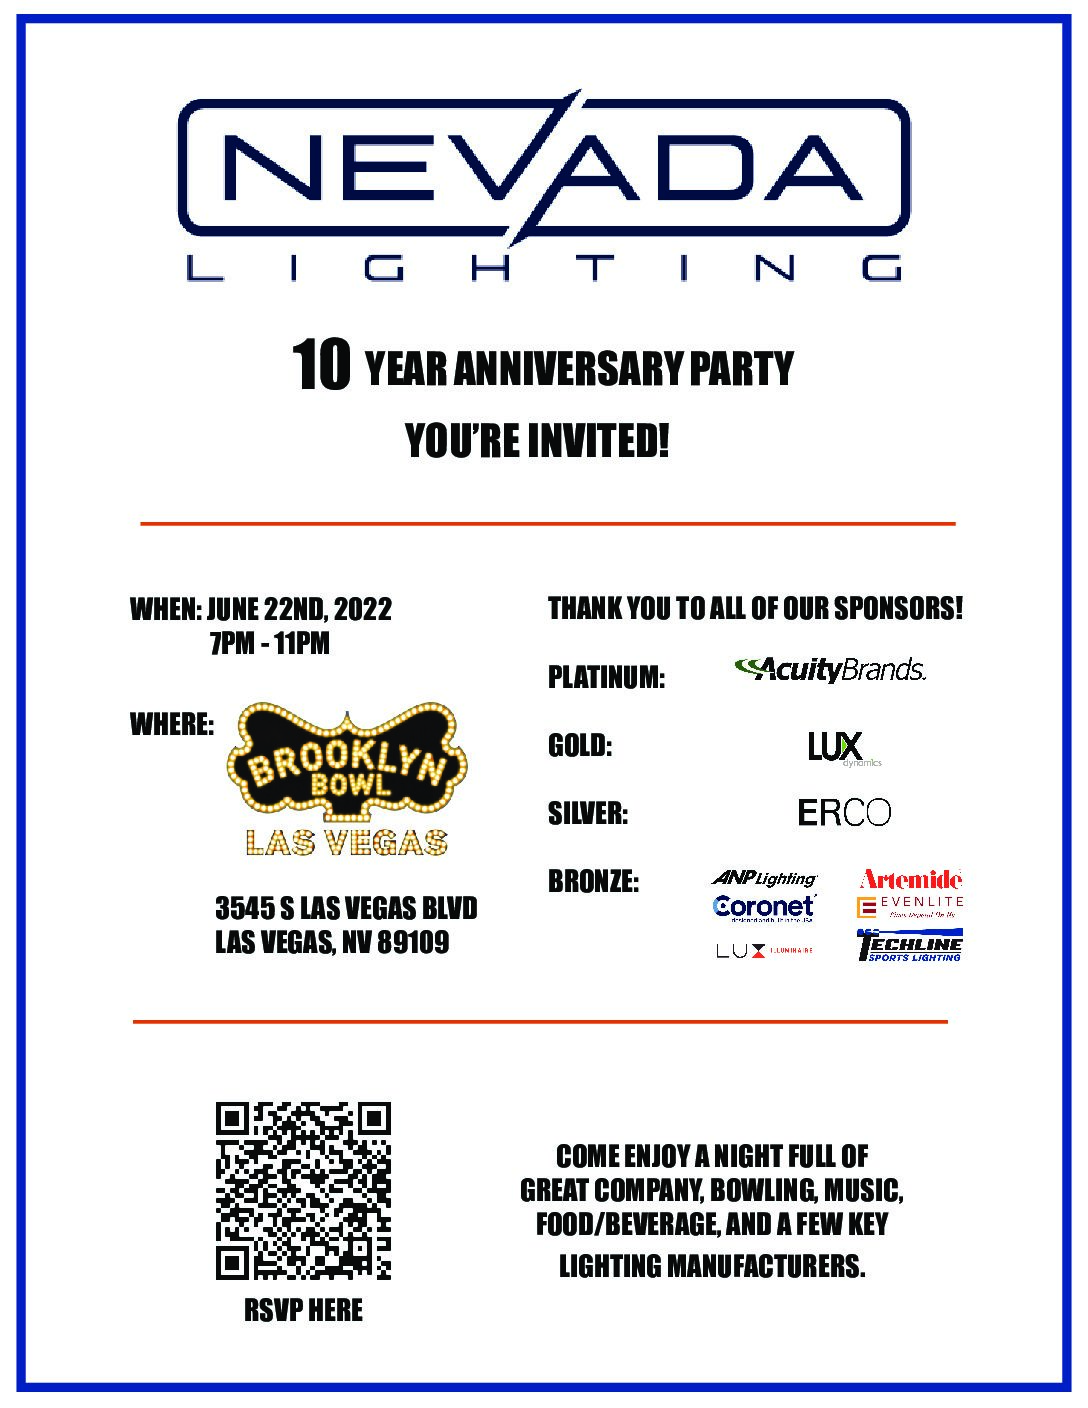 10 Year Anniversary Party 6/22/22